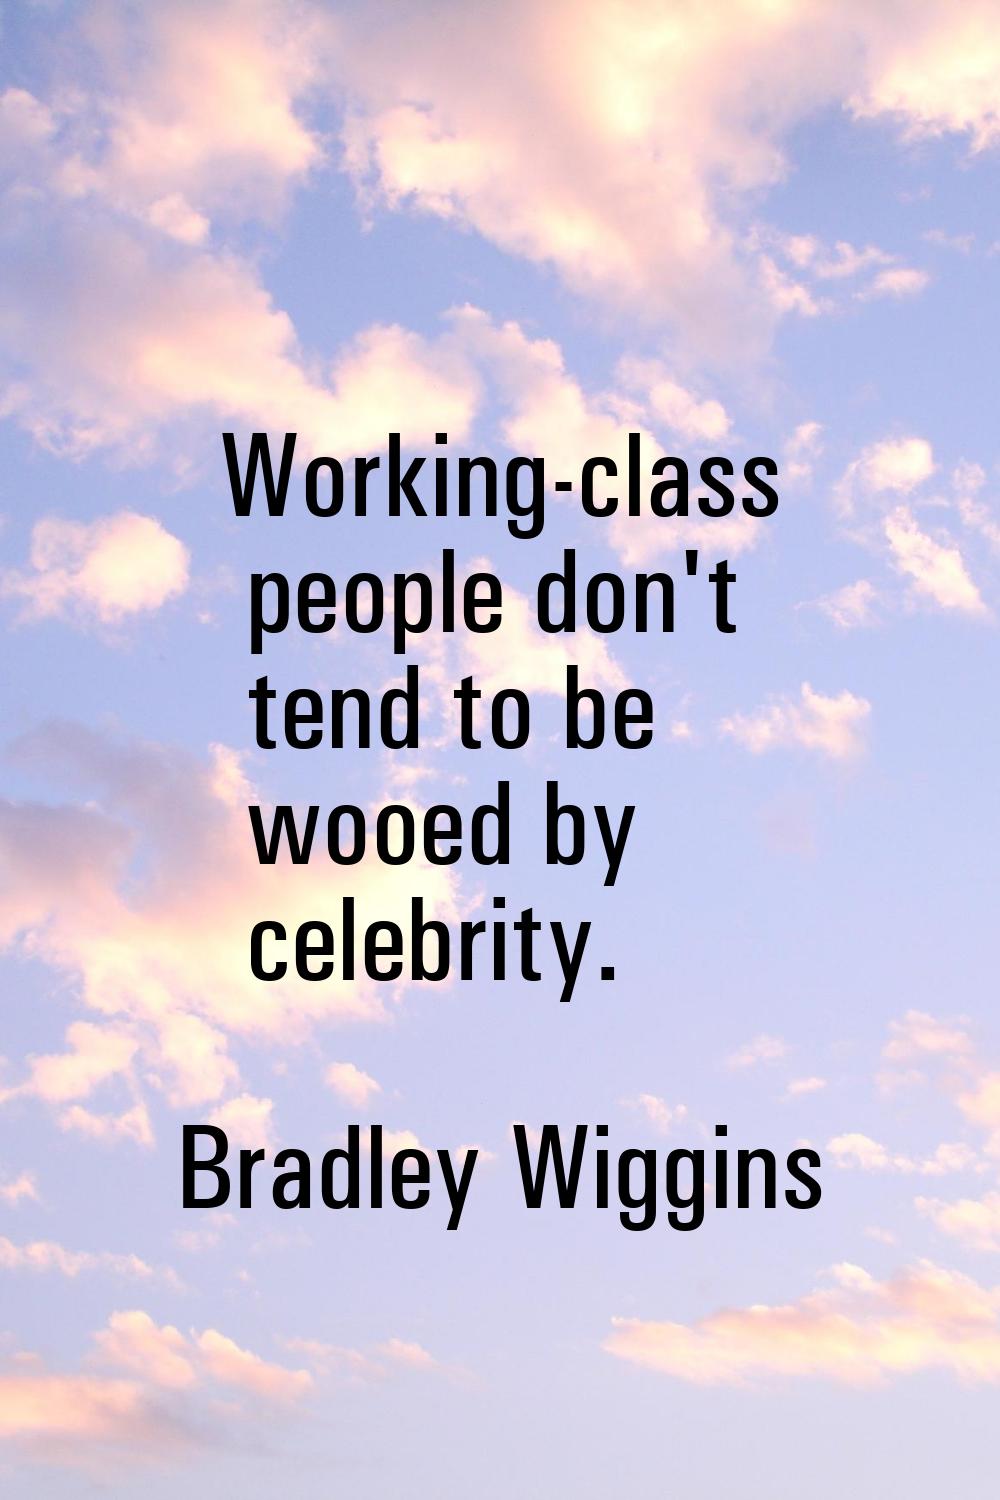 Working-class people don't tend to be wooed by celebrity.